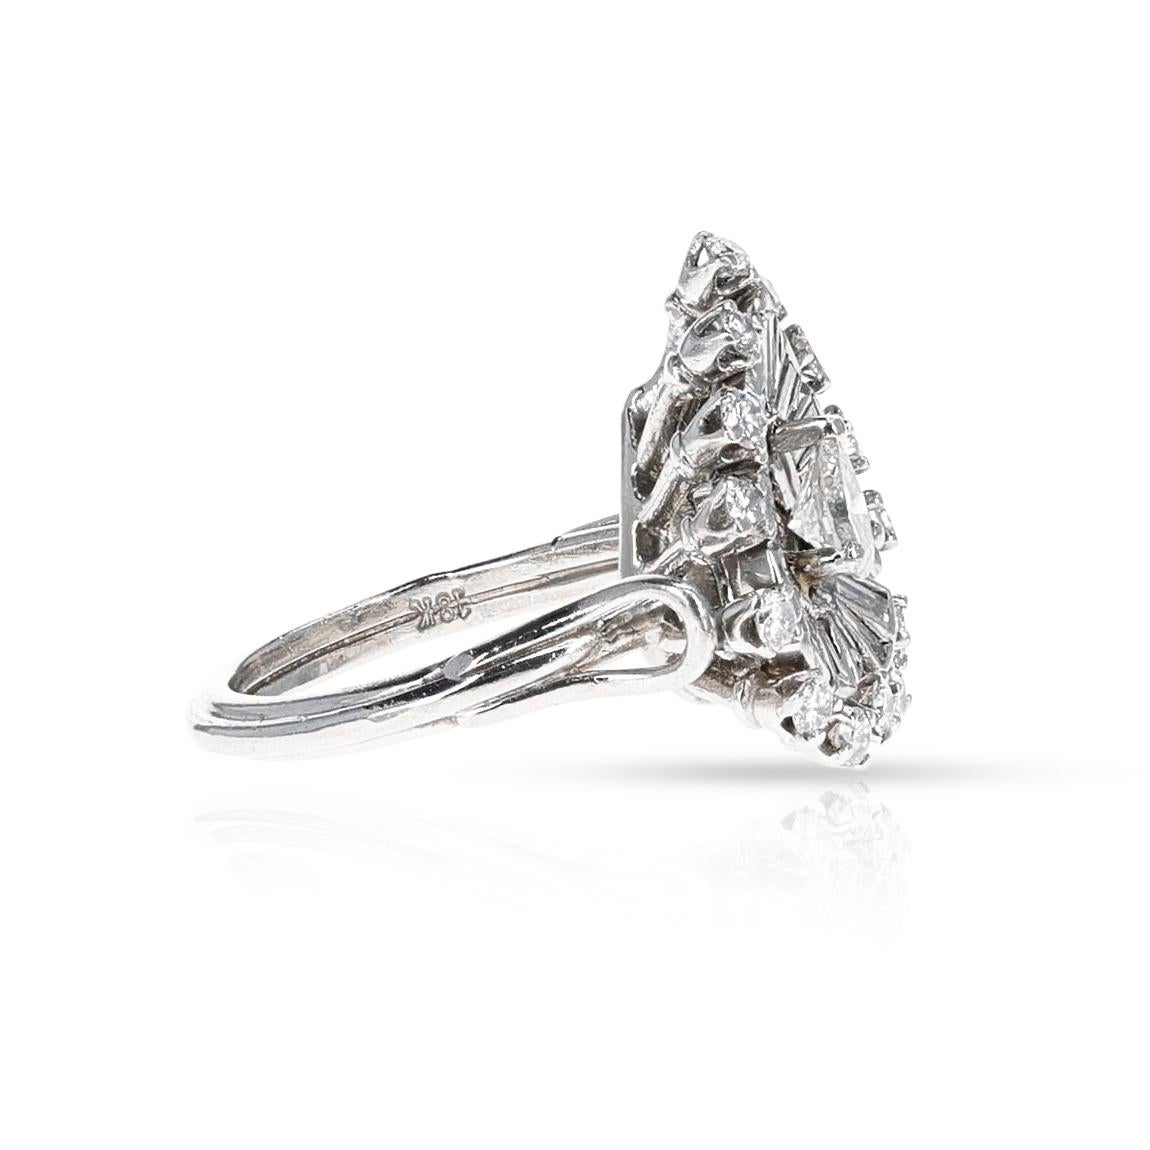 A Pear Shape Diamond Ring with Baguette and Round Diamonds made in Platinum. The total weight of the ring is 9.37 grams. The ring size is US 5.25. 